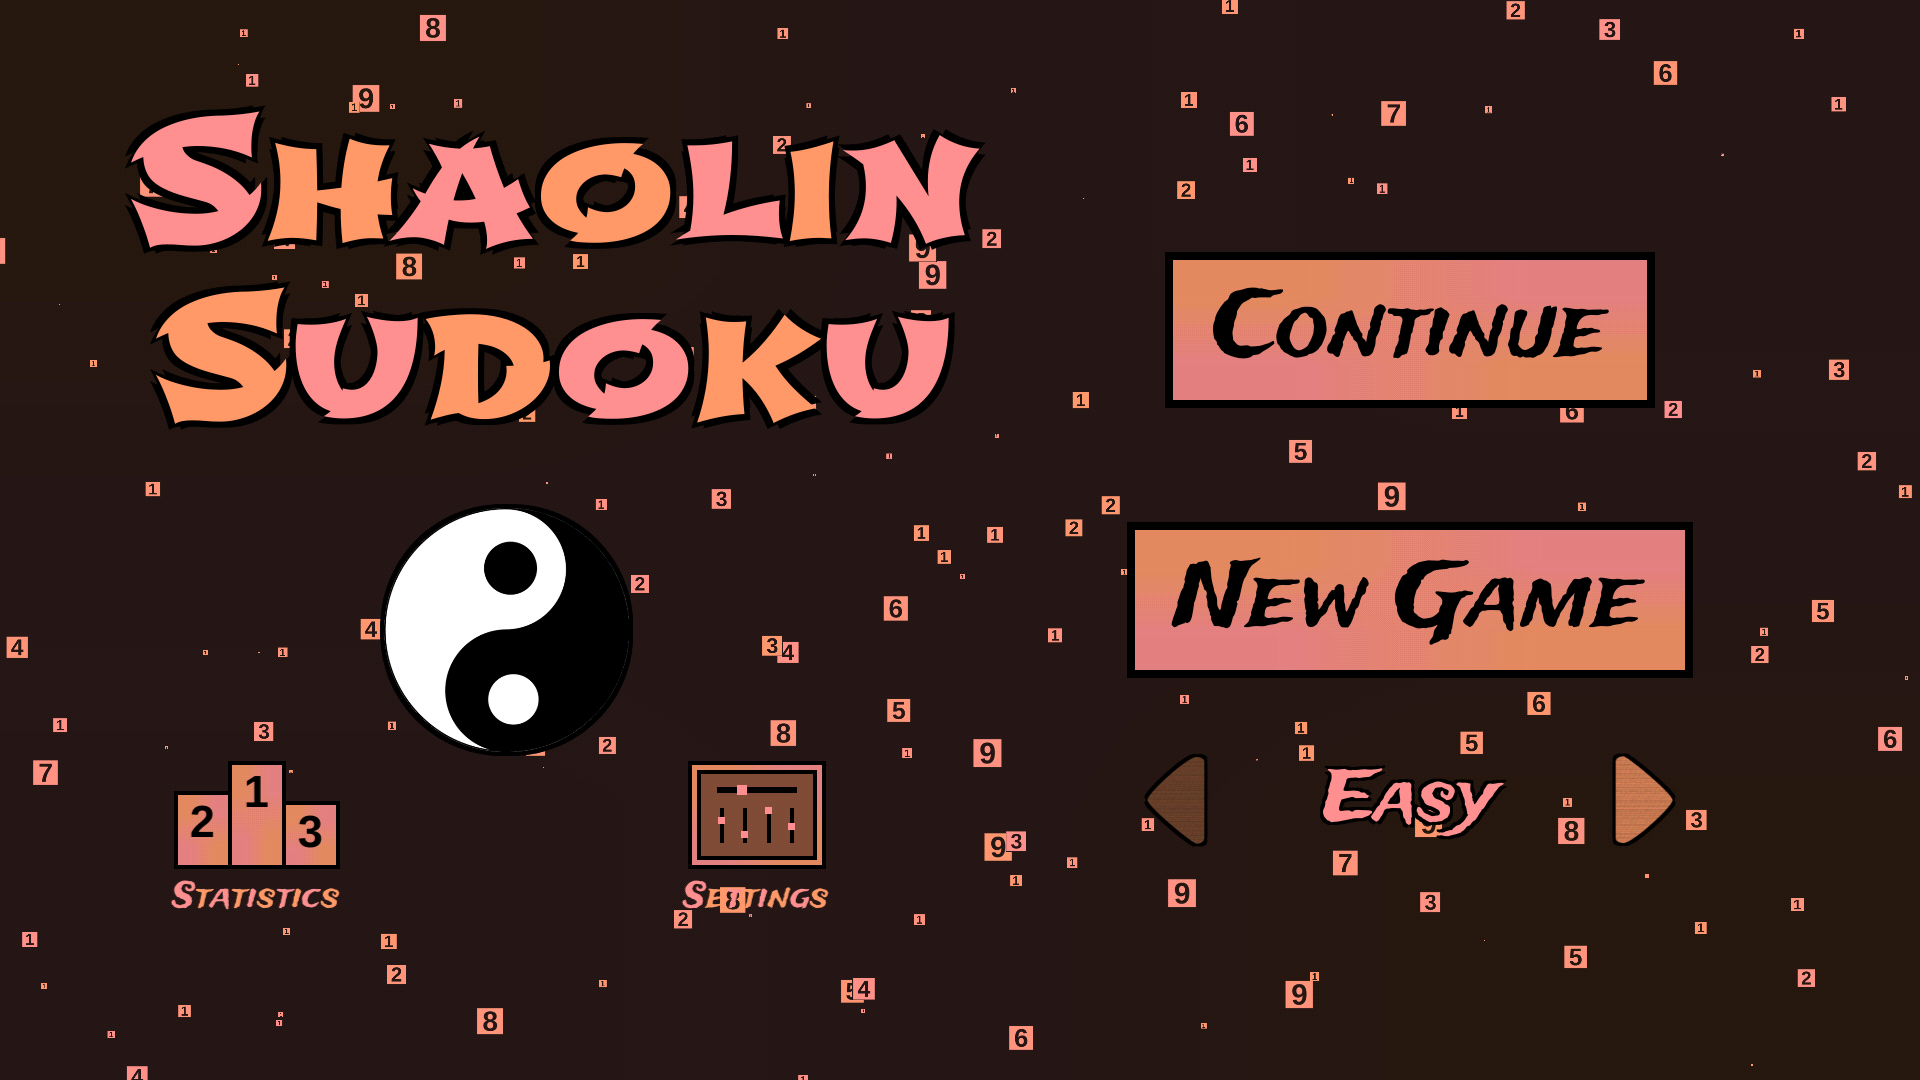 Sudoku Online 🕹️ Play on CrazyGames